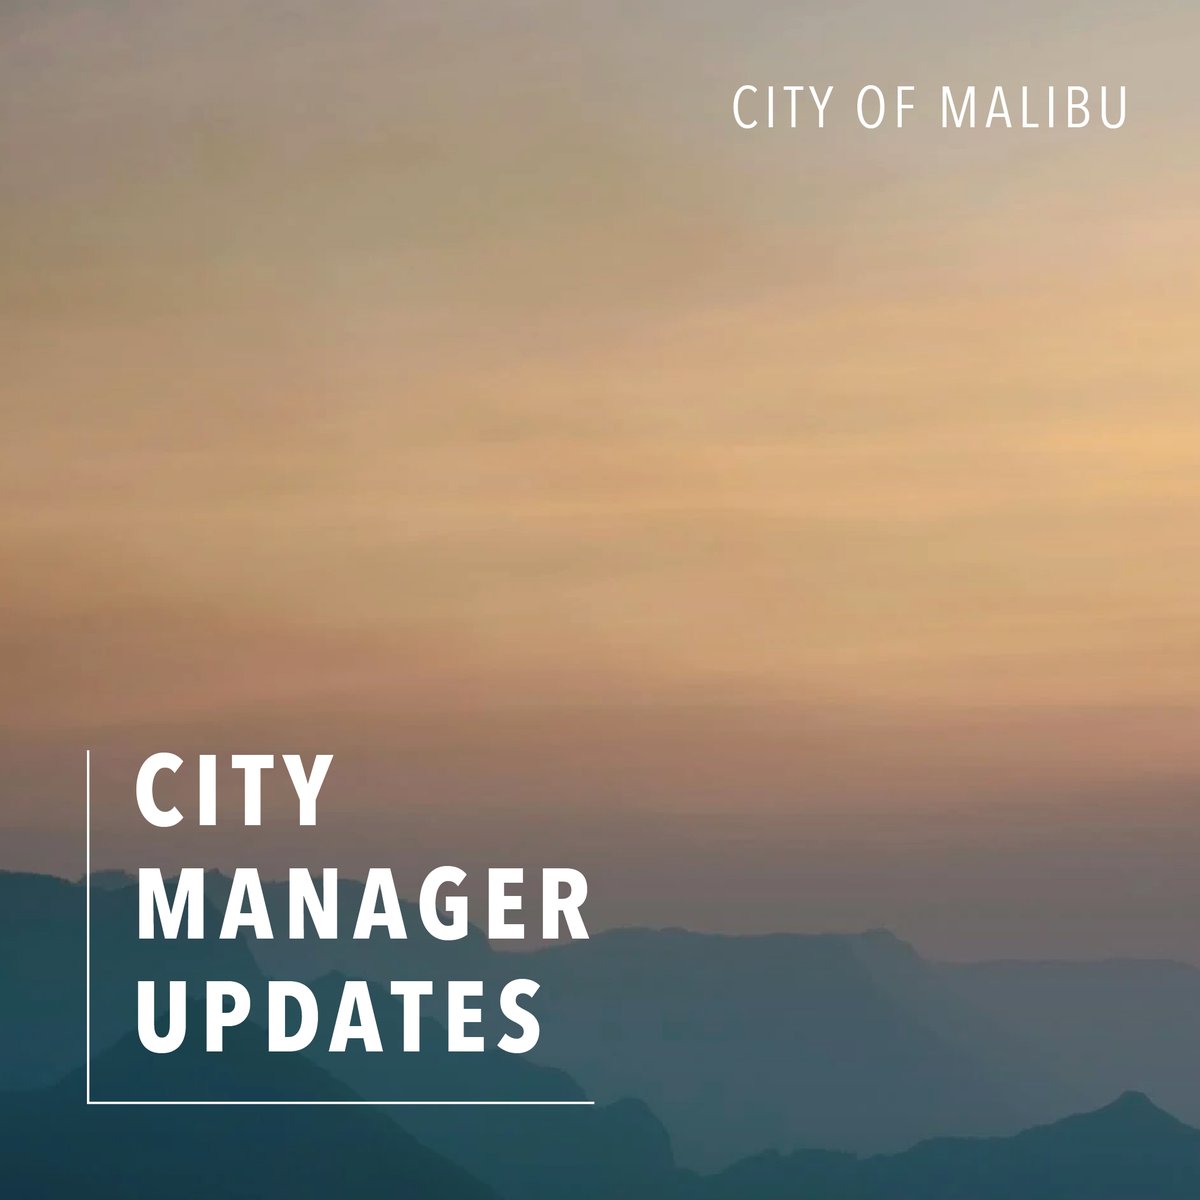 City Manager Update: Malibu & Attorney General settlement to enable the City to comply with CA housing law. State of the City May 10. Safe on PCH week at Malibu High. Homeless encampment removed at Puerco Cyn. Building Safety wins statewide award. Details: malibucity.org/CivicAlerts.as…